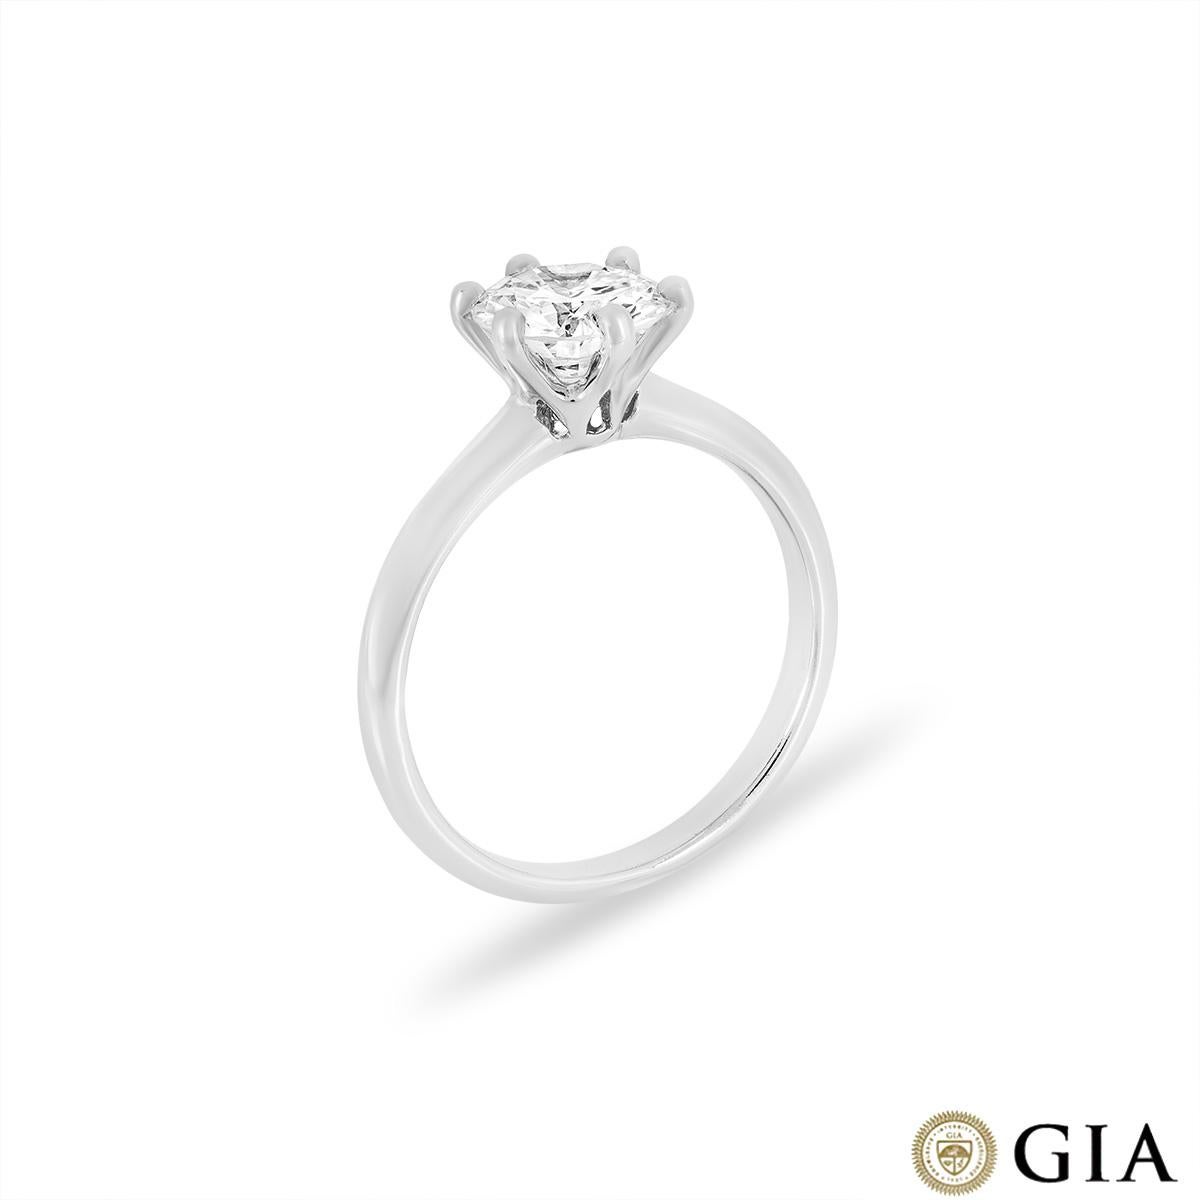 A timeless 18k white gold diamond engagement ring. The six prong solitaire is set with a round brilliant cut diamond weighing 1.34ct, I colour and VS1 clarity. The 2.2mm knife edge ring has a gross weight of 3.27 grams and is currently a size M½ but